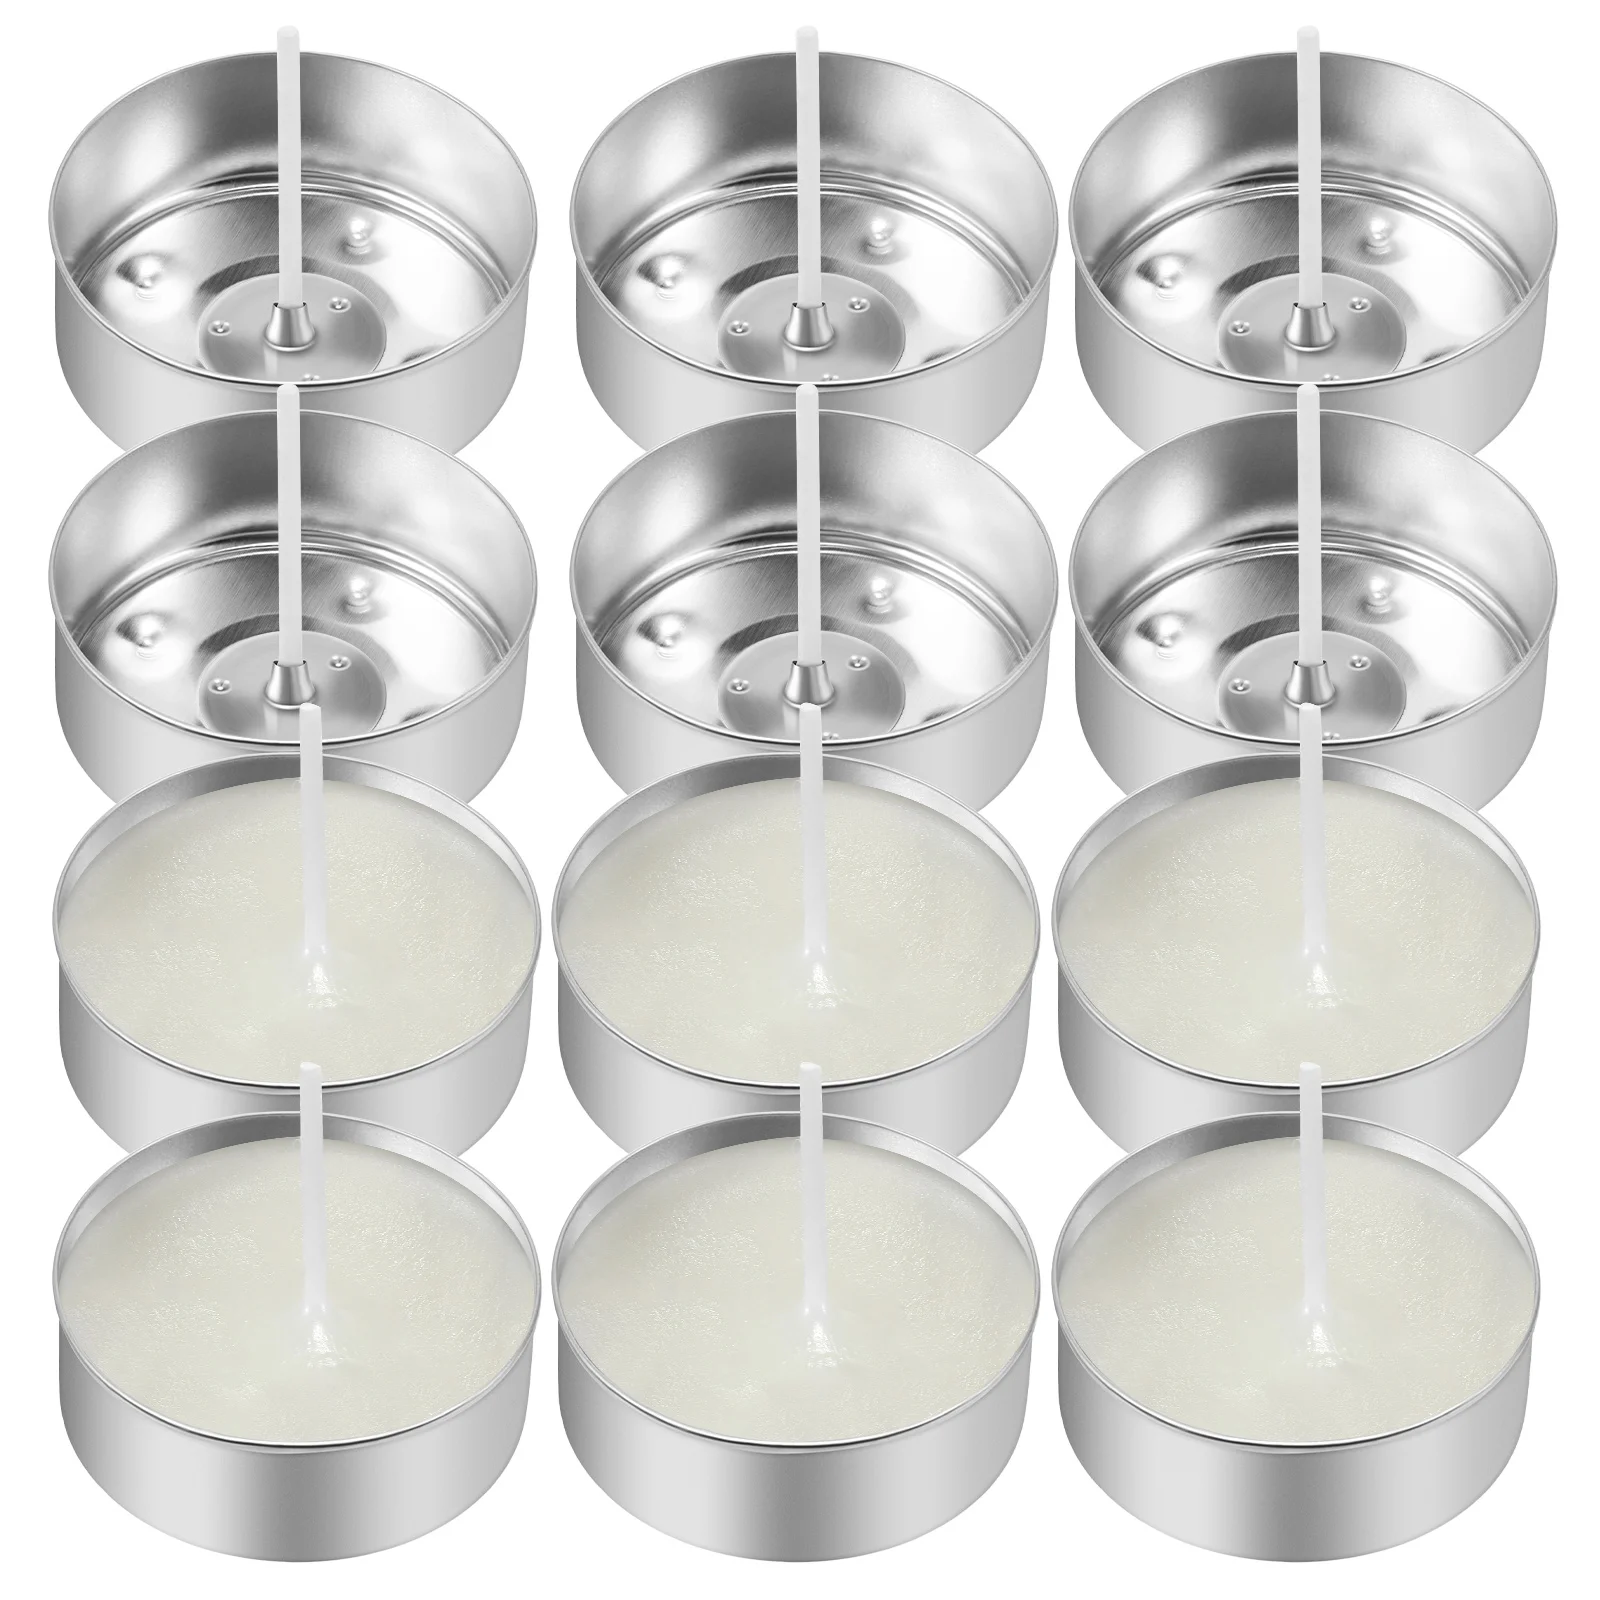 

Aluminum Tea Lights Cups Metal Tea Light Tins Candle Wicks Empty Candle Jars Candle Containers Candle Mold Stocking Stuffer